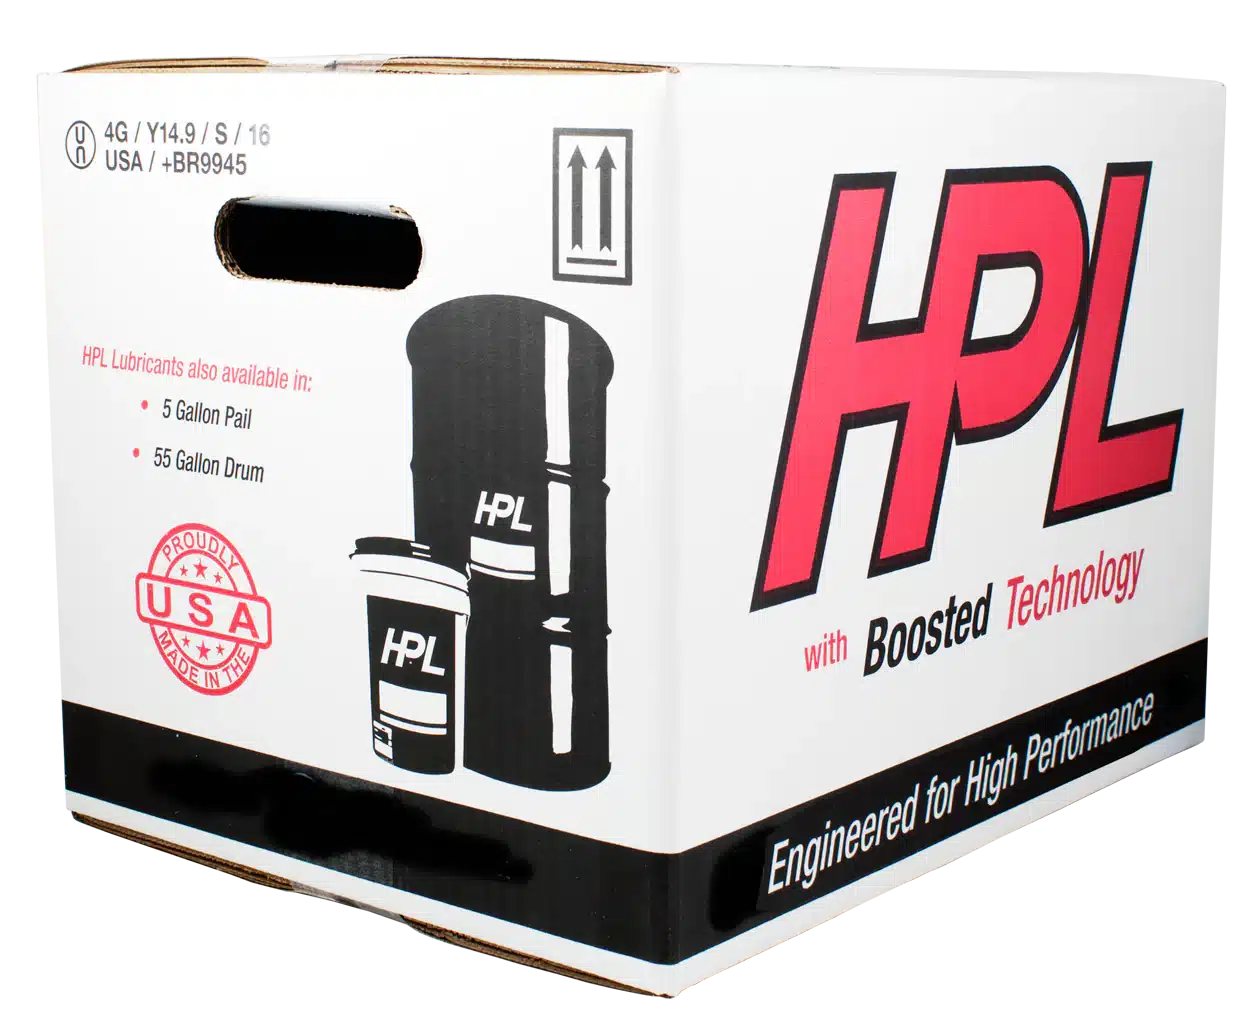 Superior Lubrication with HPL OIL